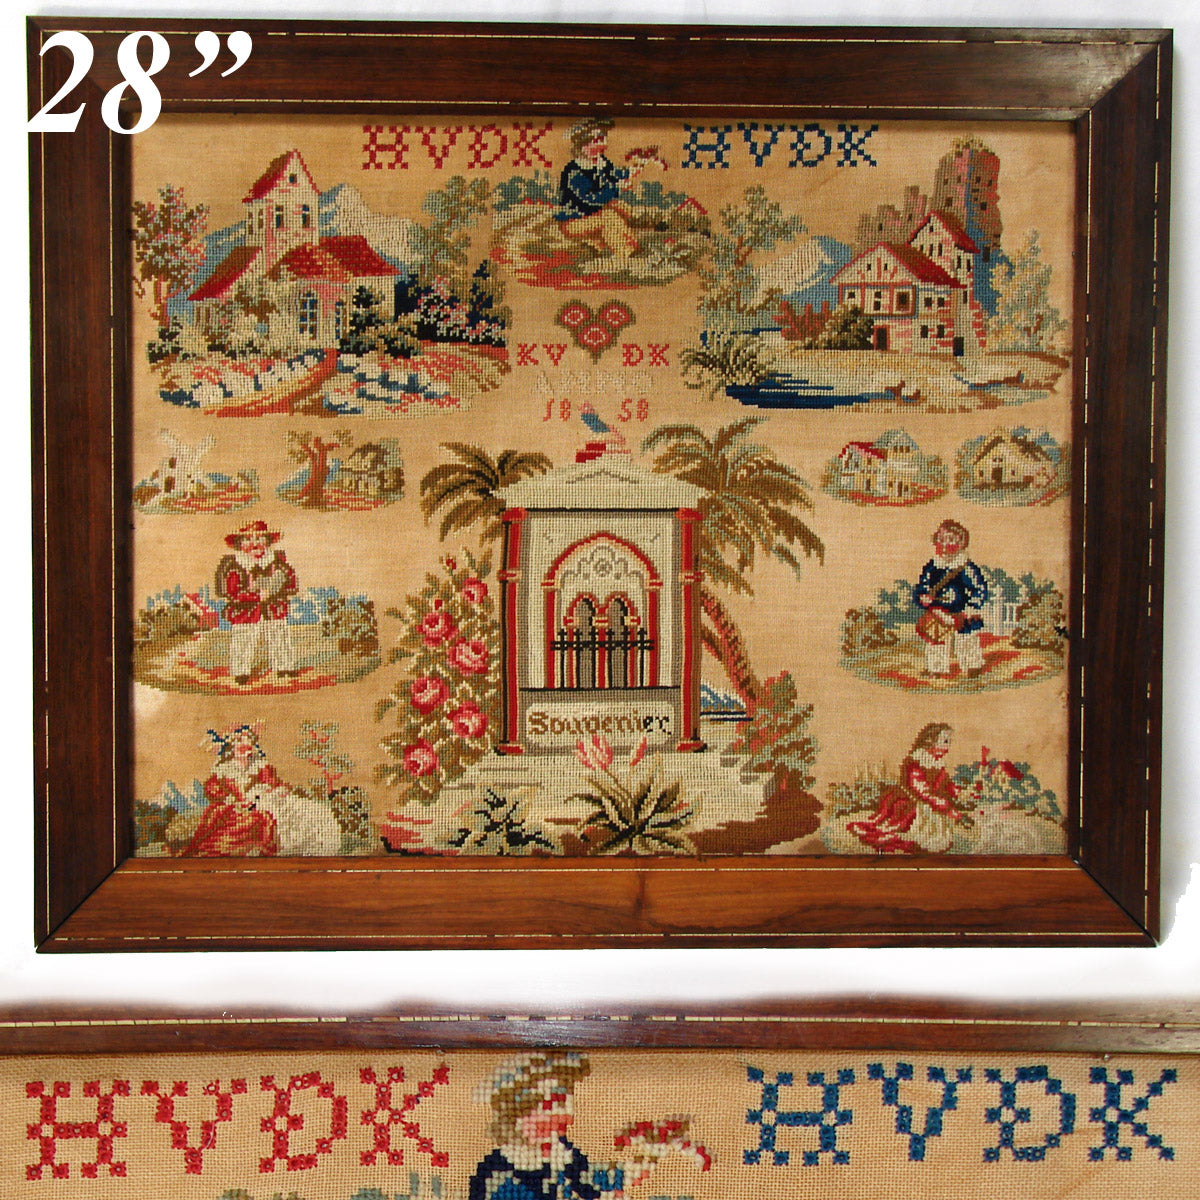 Antique Victorian Needlepoint Tapestry, Sampler, 28.5" Rosewood Frame: 1858 "Souvenir" with Tomb